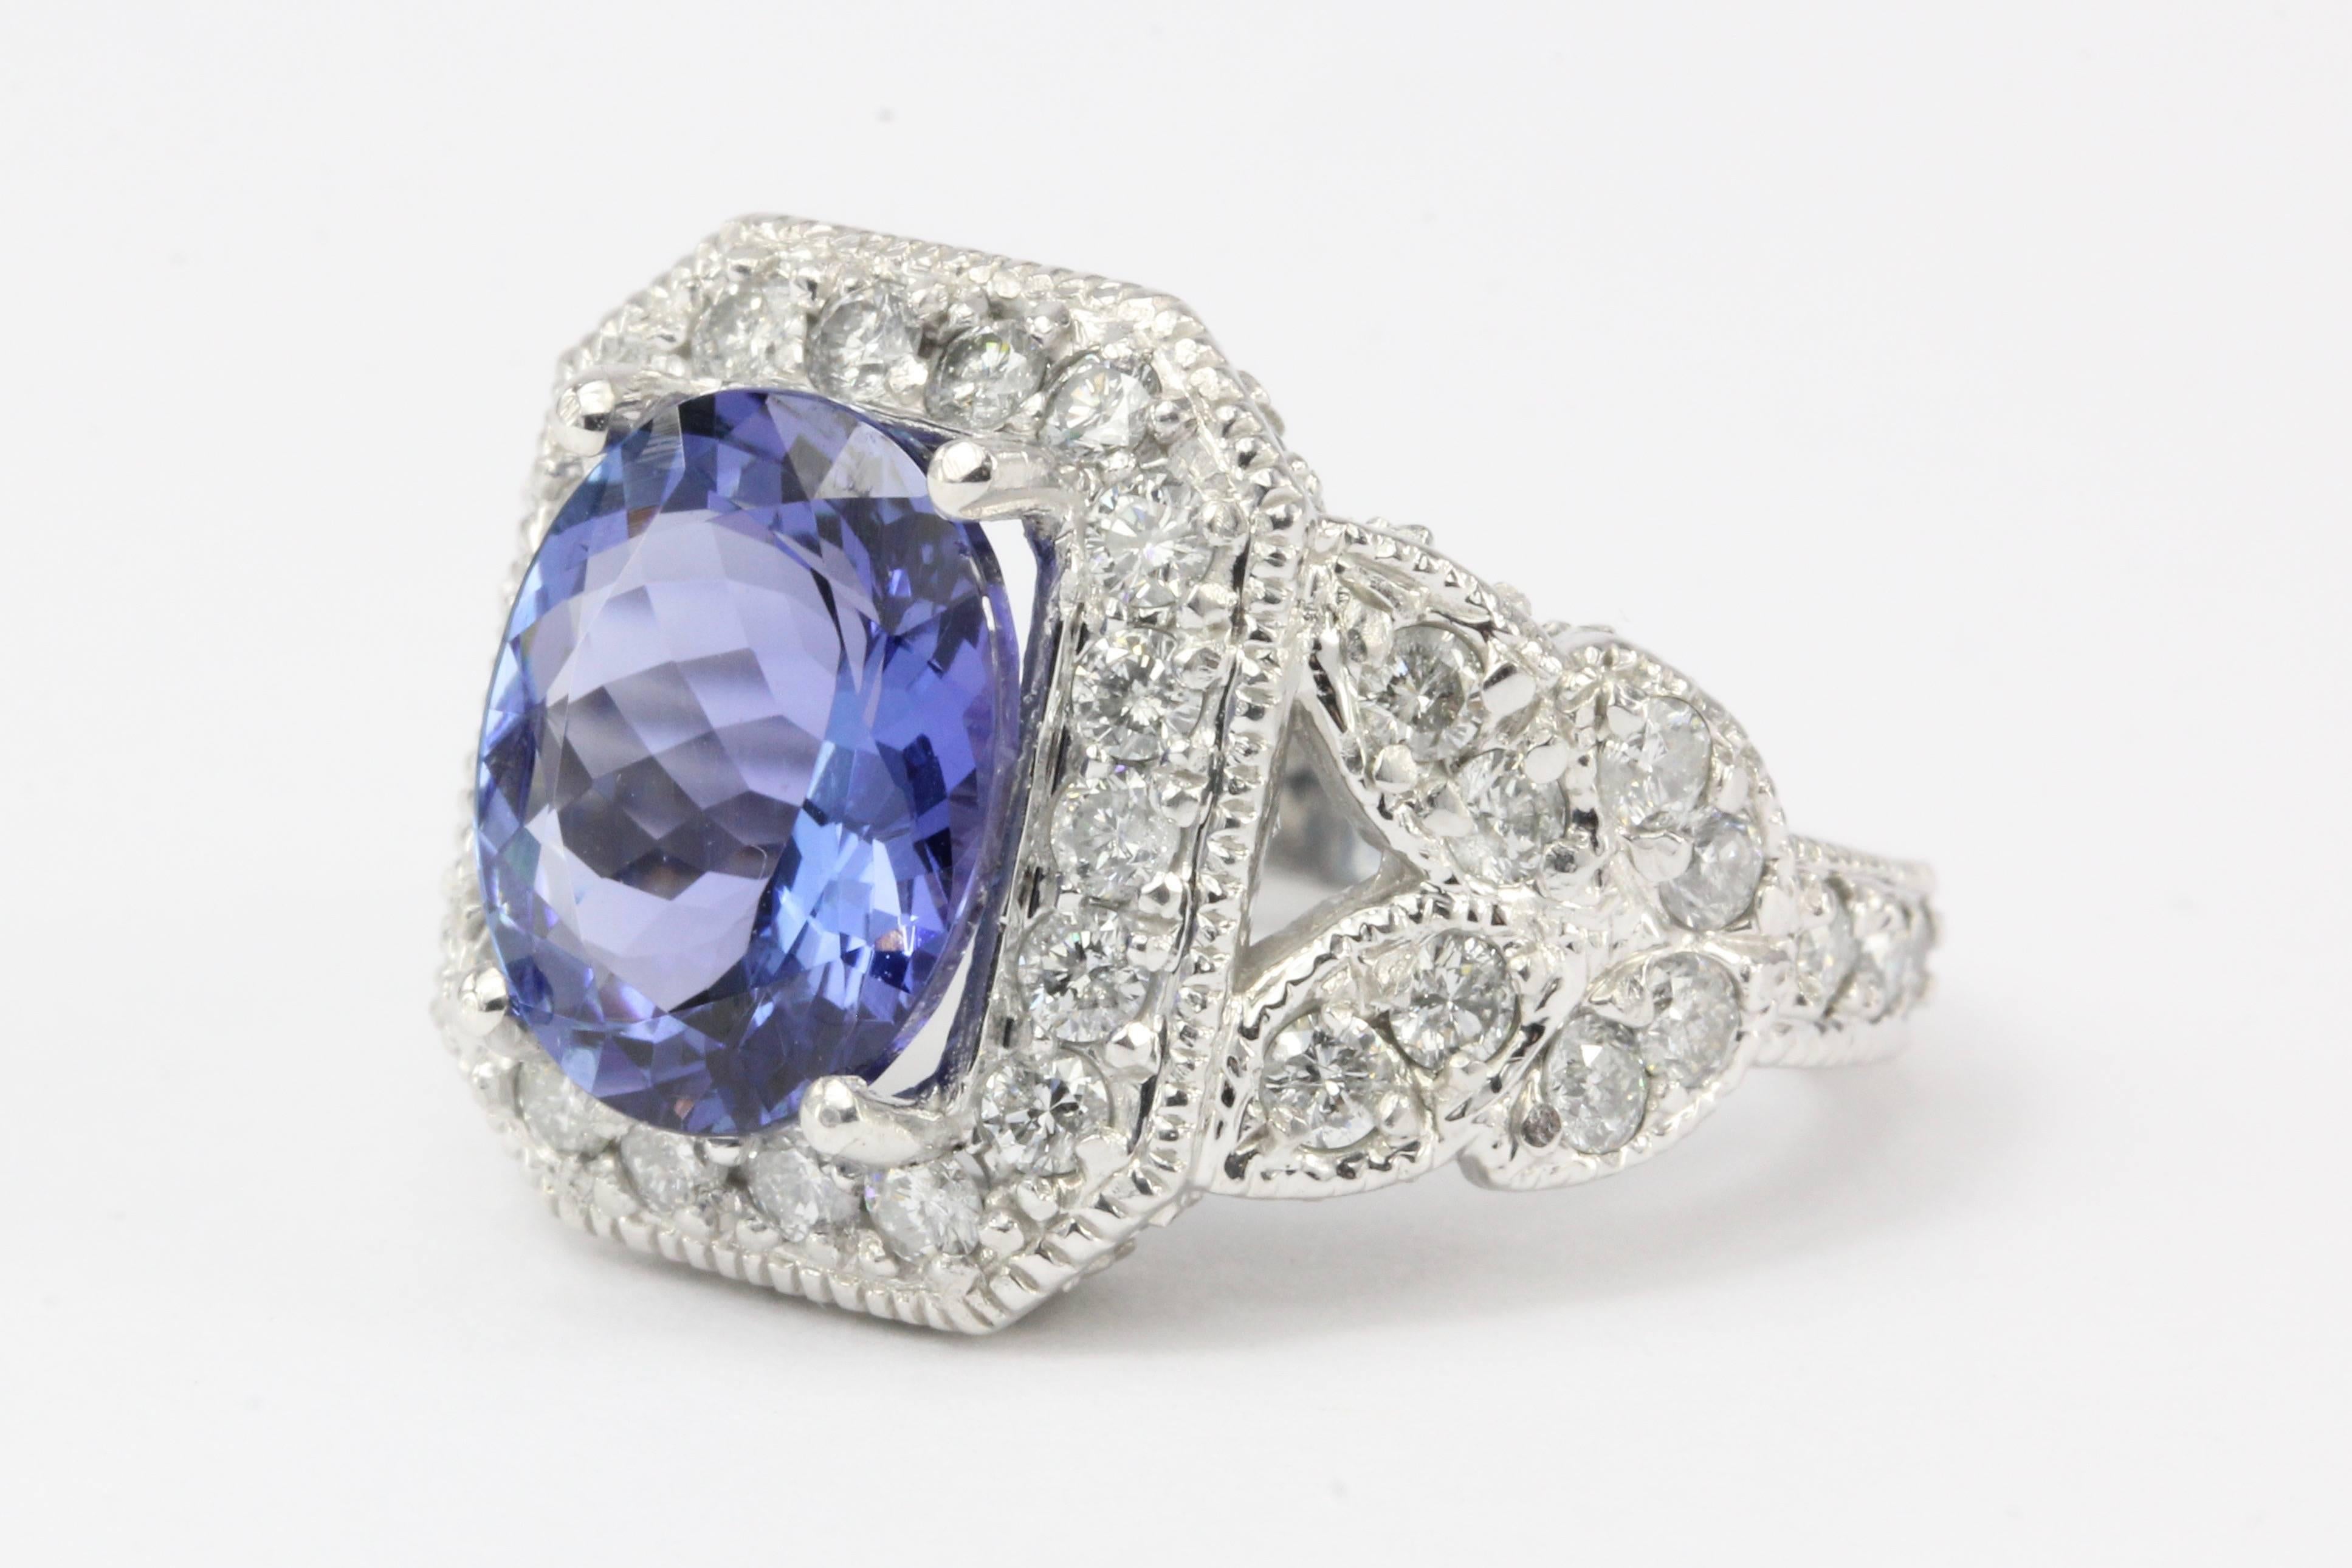 Era: Modern 

Composition: 14K white gold

Primary Stone: Tanzanite

Stone Carat: 5 Carat

Secondary Stone: Diamond

Secondary Stone Carat Weight: 2.5 CTW

Color: H/I

Clarity: Si2/I1

Ring Face: 17mm x 15mm wide

Ring Size: 6

Ring Weight: 12.4